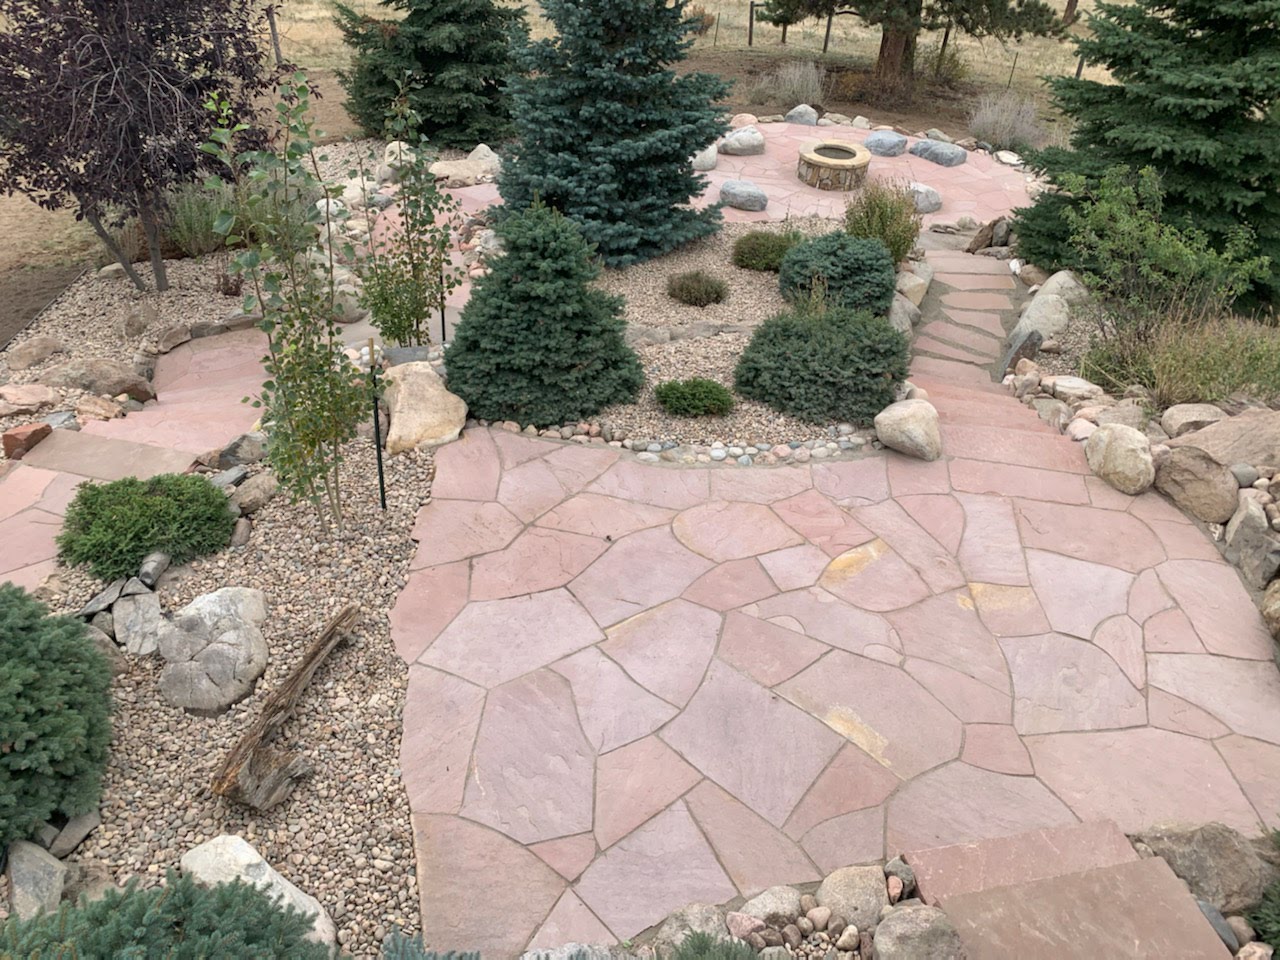 Large outdoor space complete with red flagstone paths, landscaped trees, and fireplace